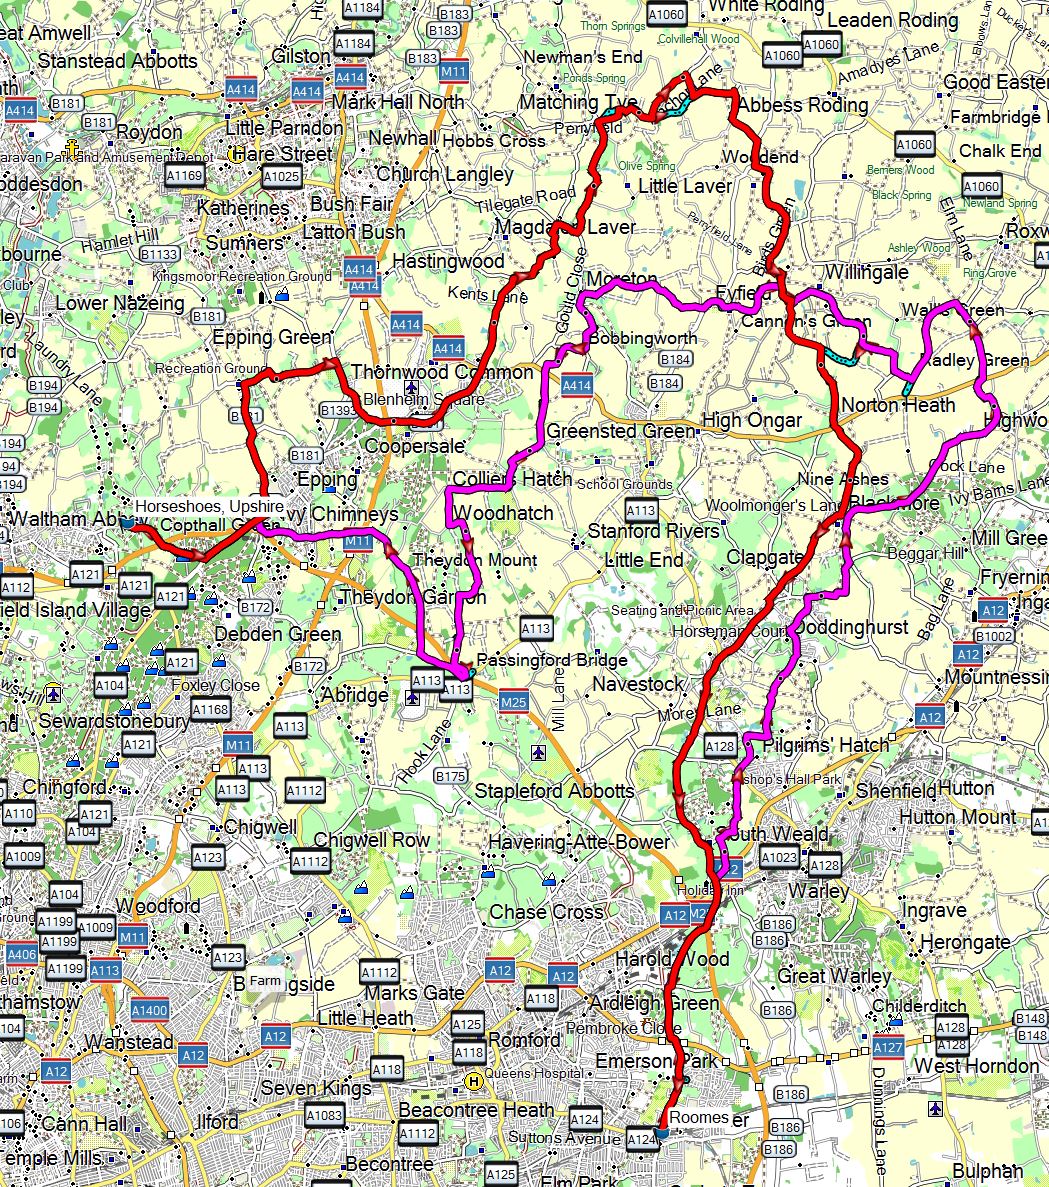 26th April 2015 Fast Group Route to Upshire